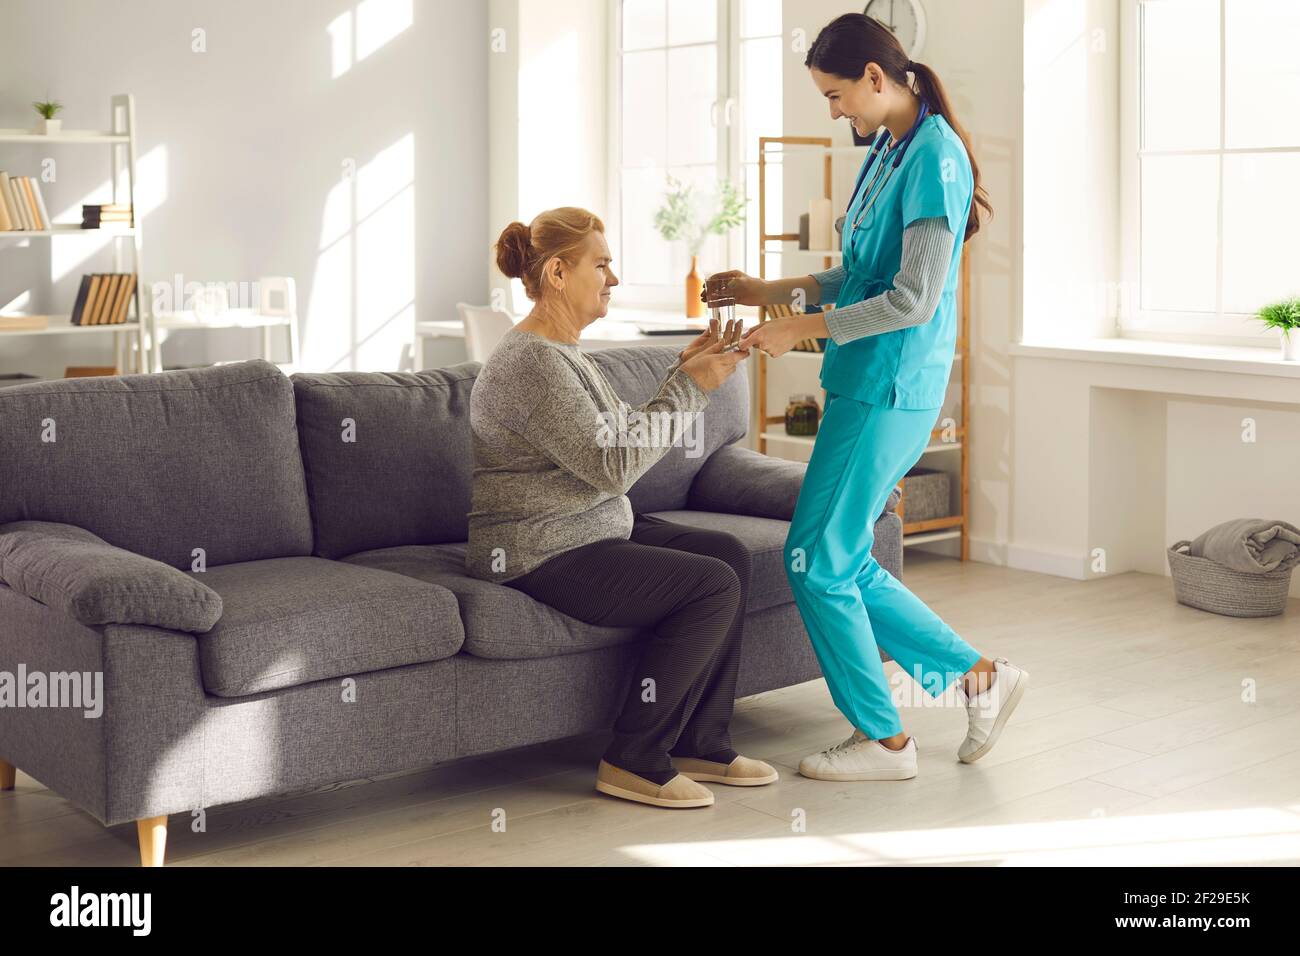 Friendly nurse at hospital or assisted living facility giving glass of water to mature woman Stock Photo